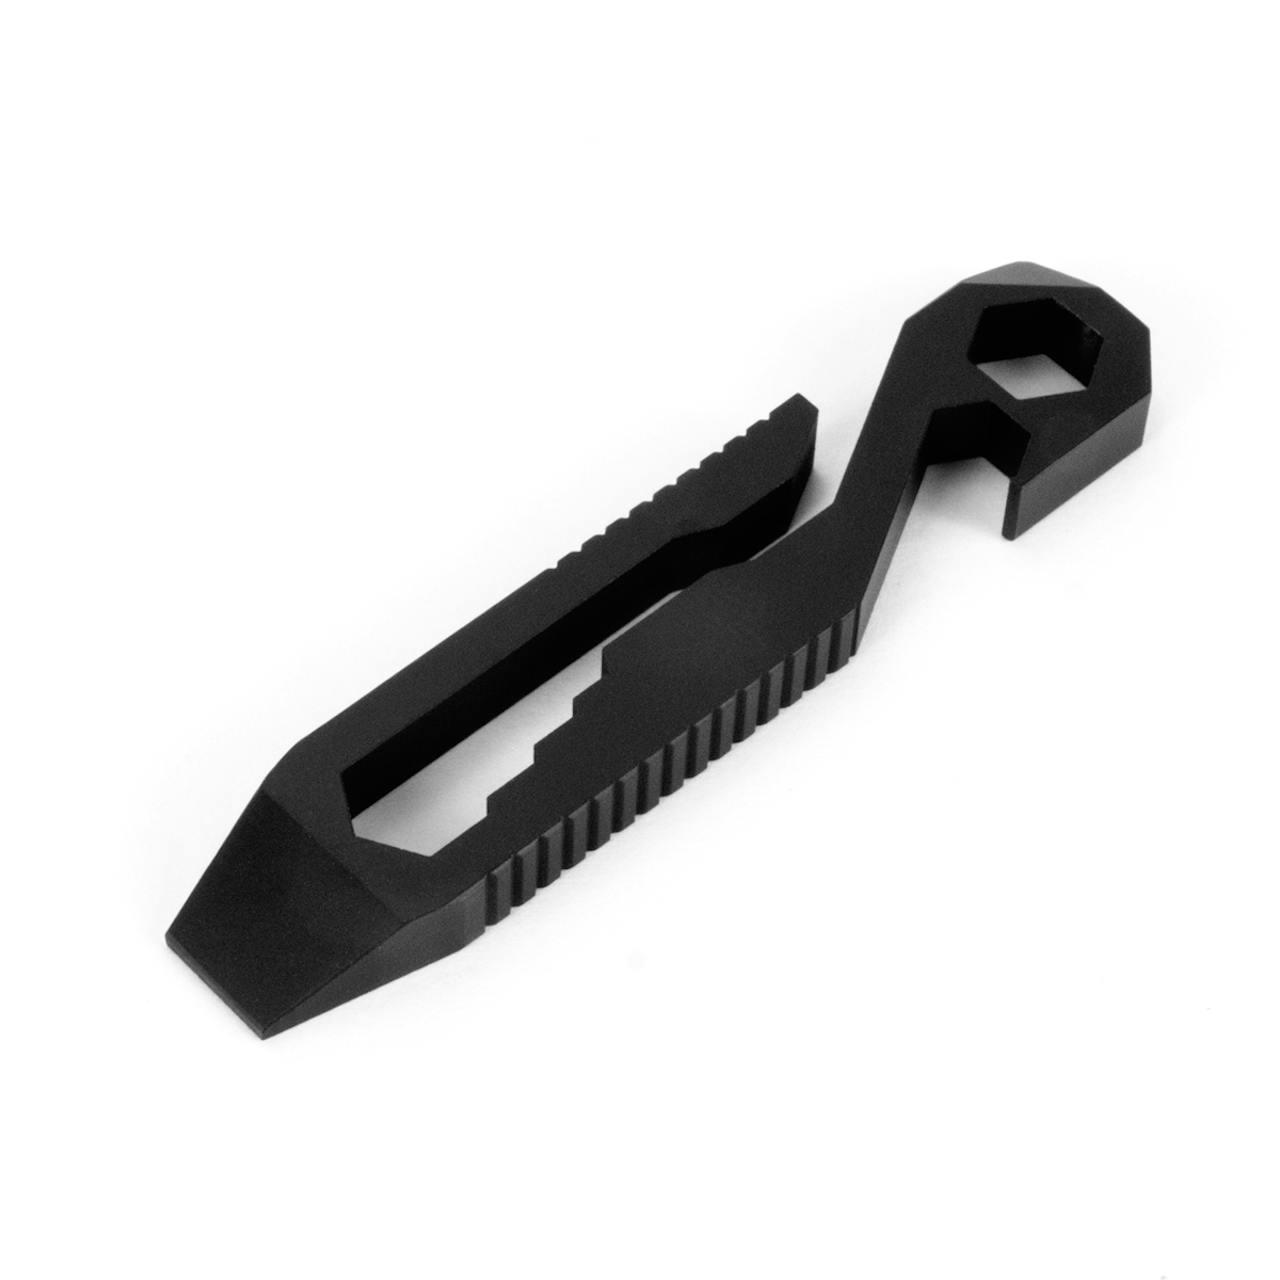 Griffin Pocket Tool 11-in-1 Pocket Tool - Black Stainless